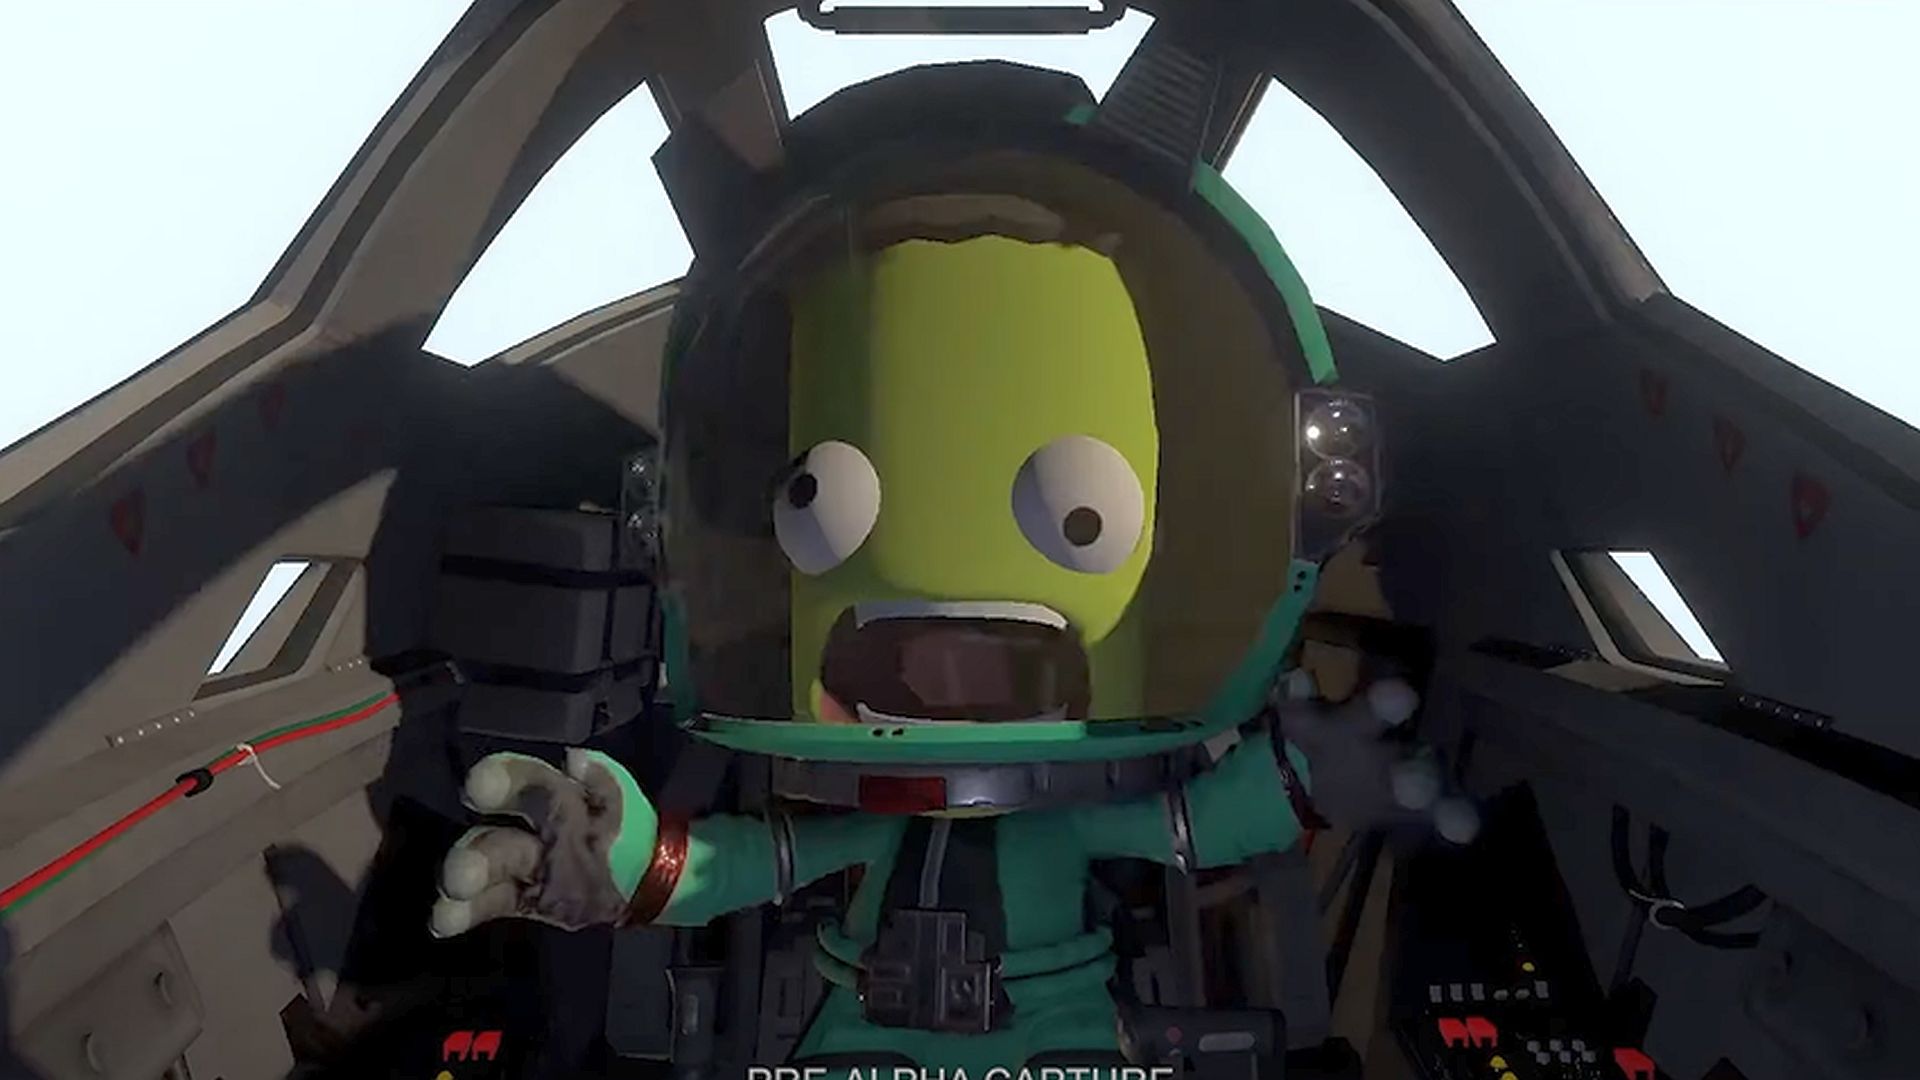 Kerbal Space Program 2 changes mean kerbals scream and flail when you